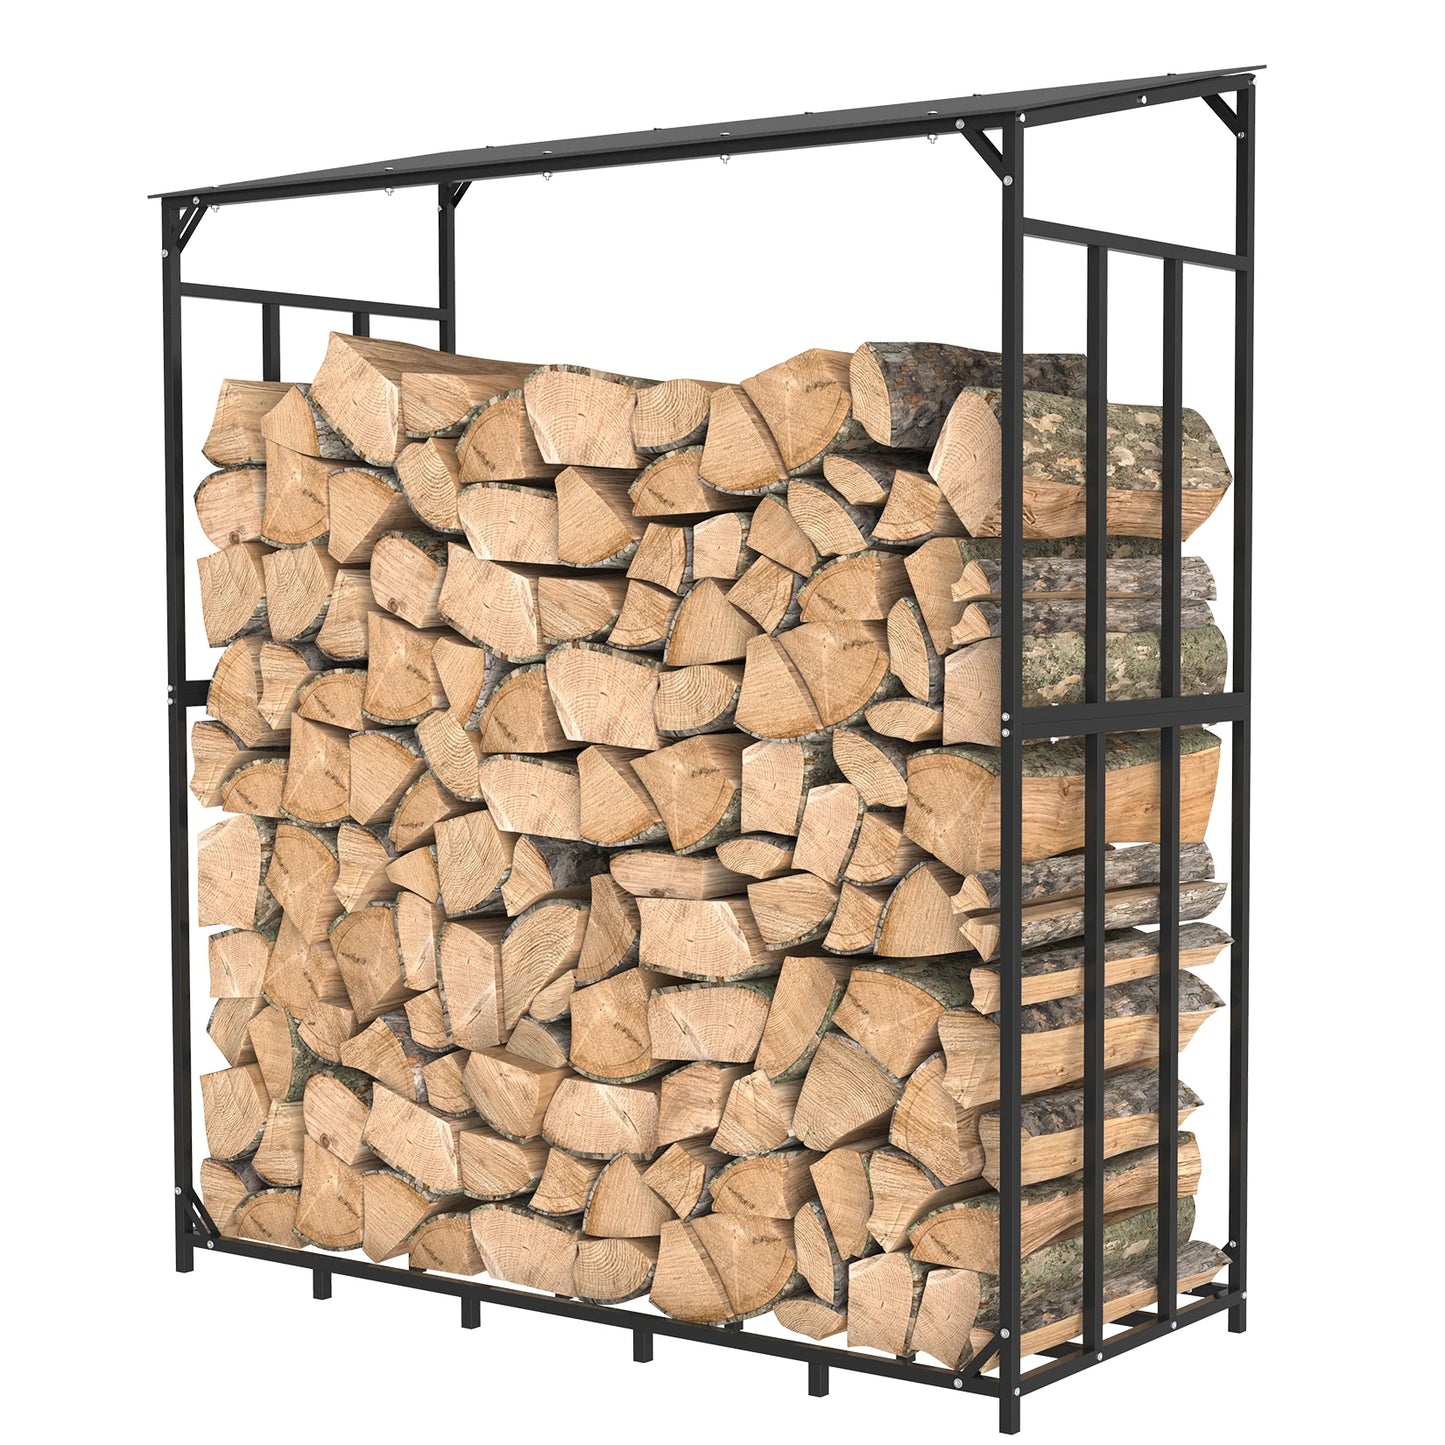 Tall Heavy Duty Outdoor Firewood Rack with Cover